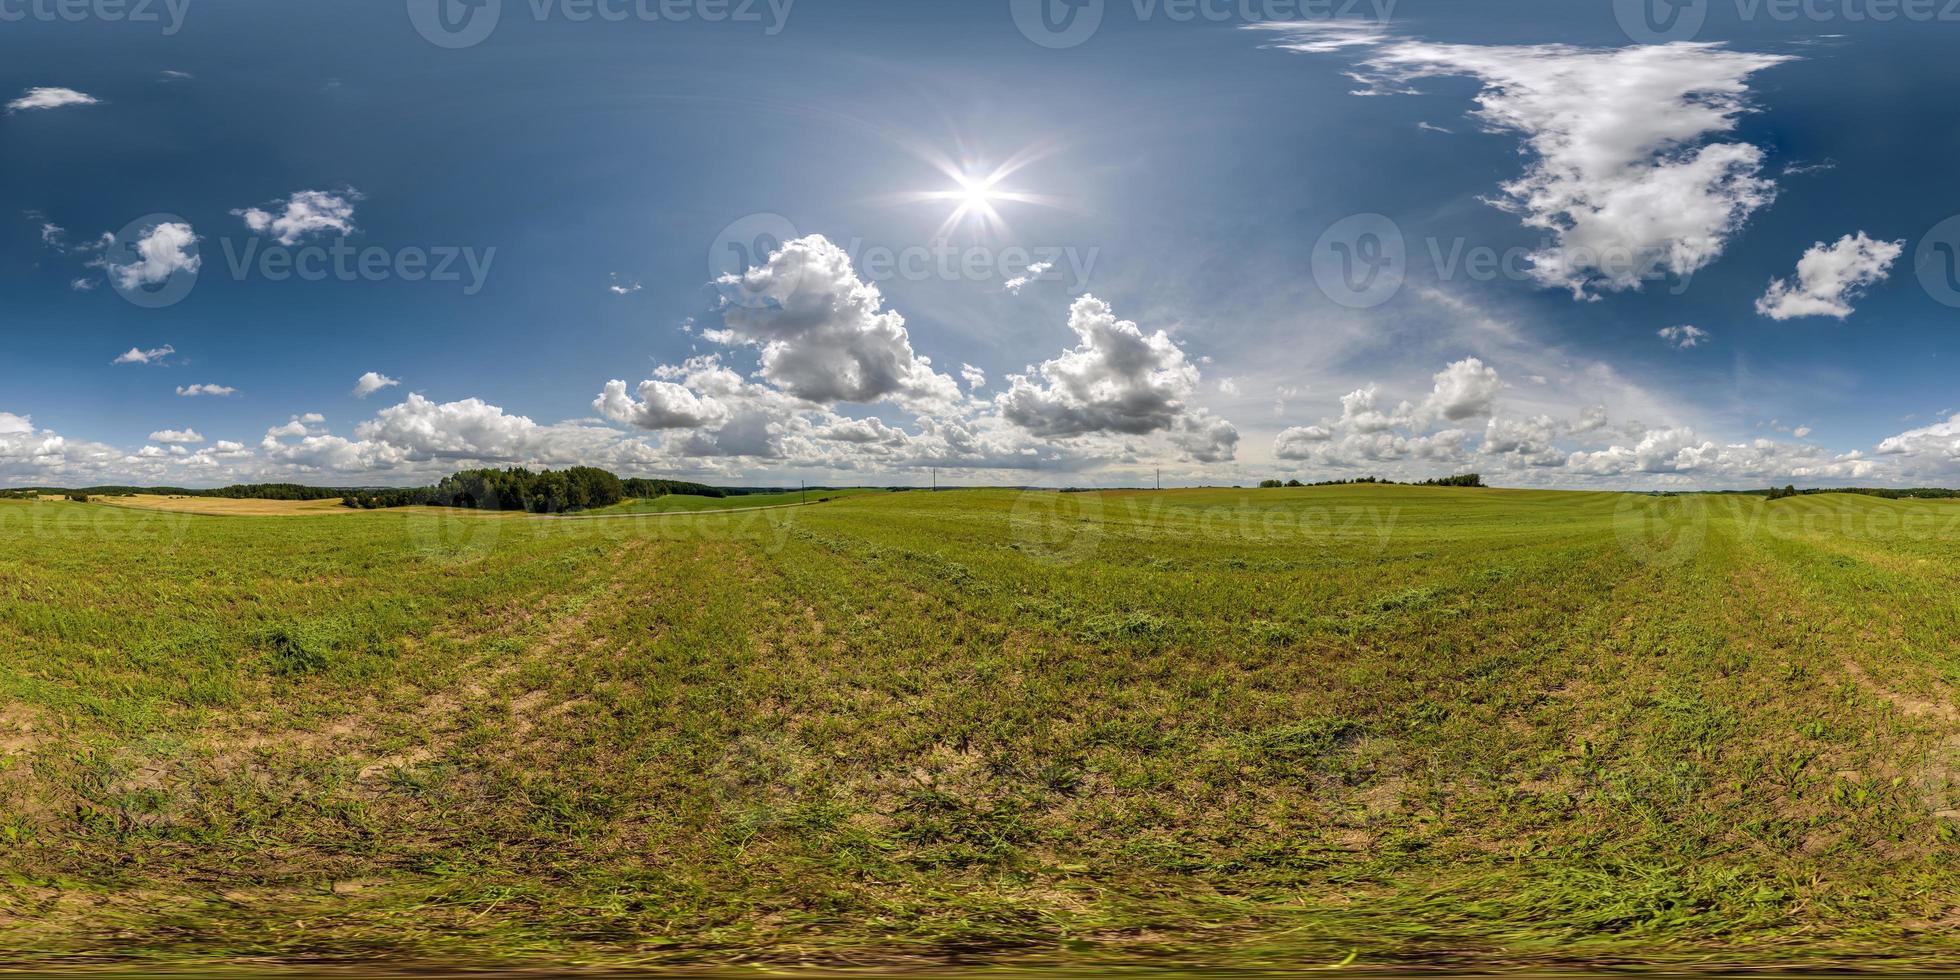 full seamless 360 hdri panorama view among farming field with sun and clouds in overcast sky in equirectangular spherical projection, ready for use as sky replacement in drone panoramas or VR content photo